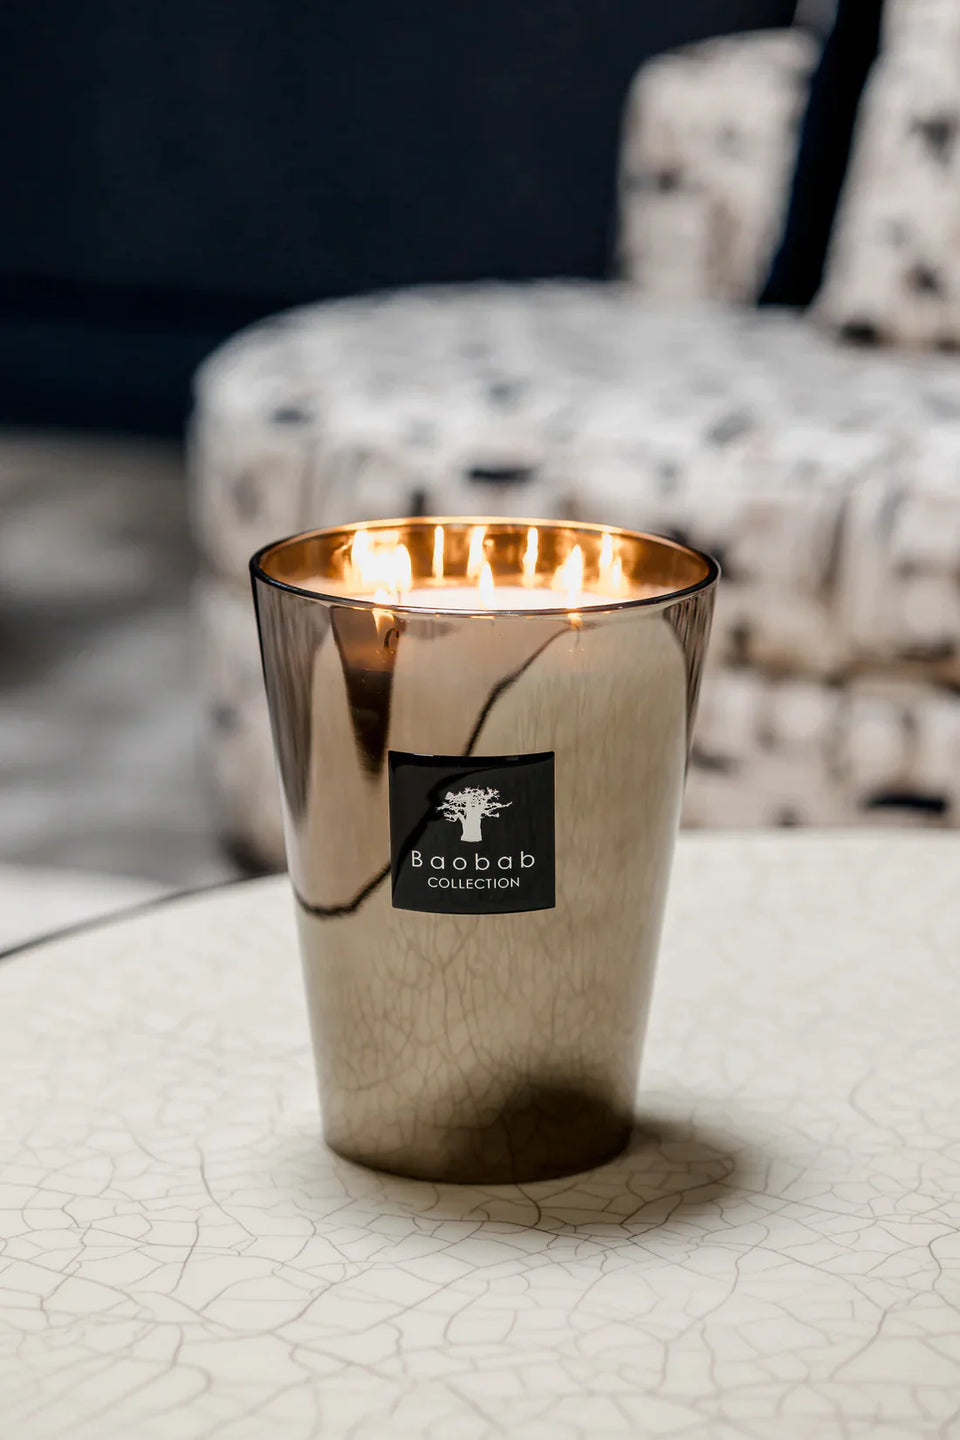 Baobab Collection "Platinum" candle